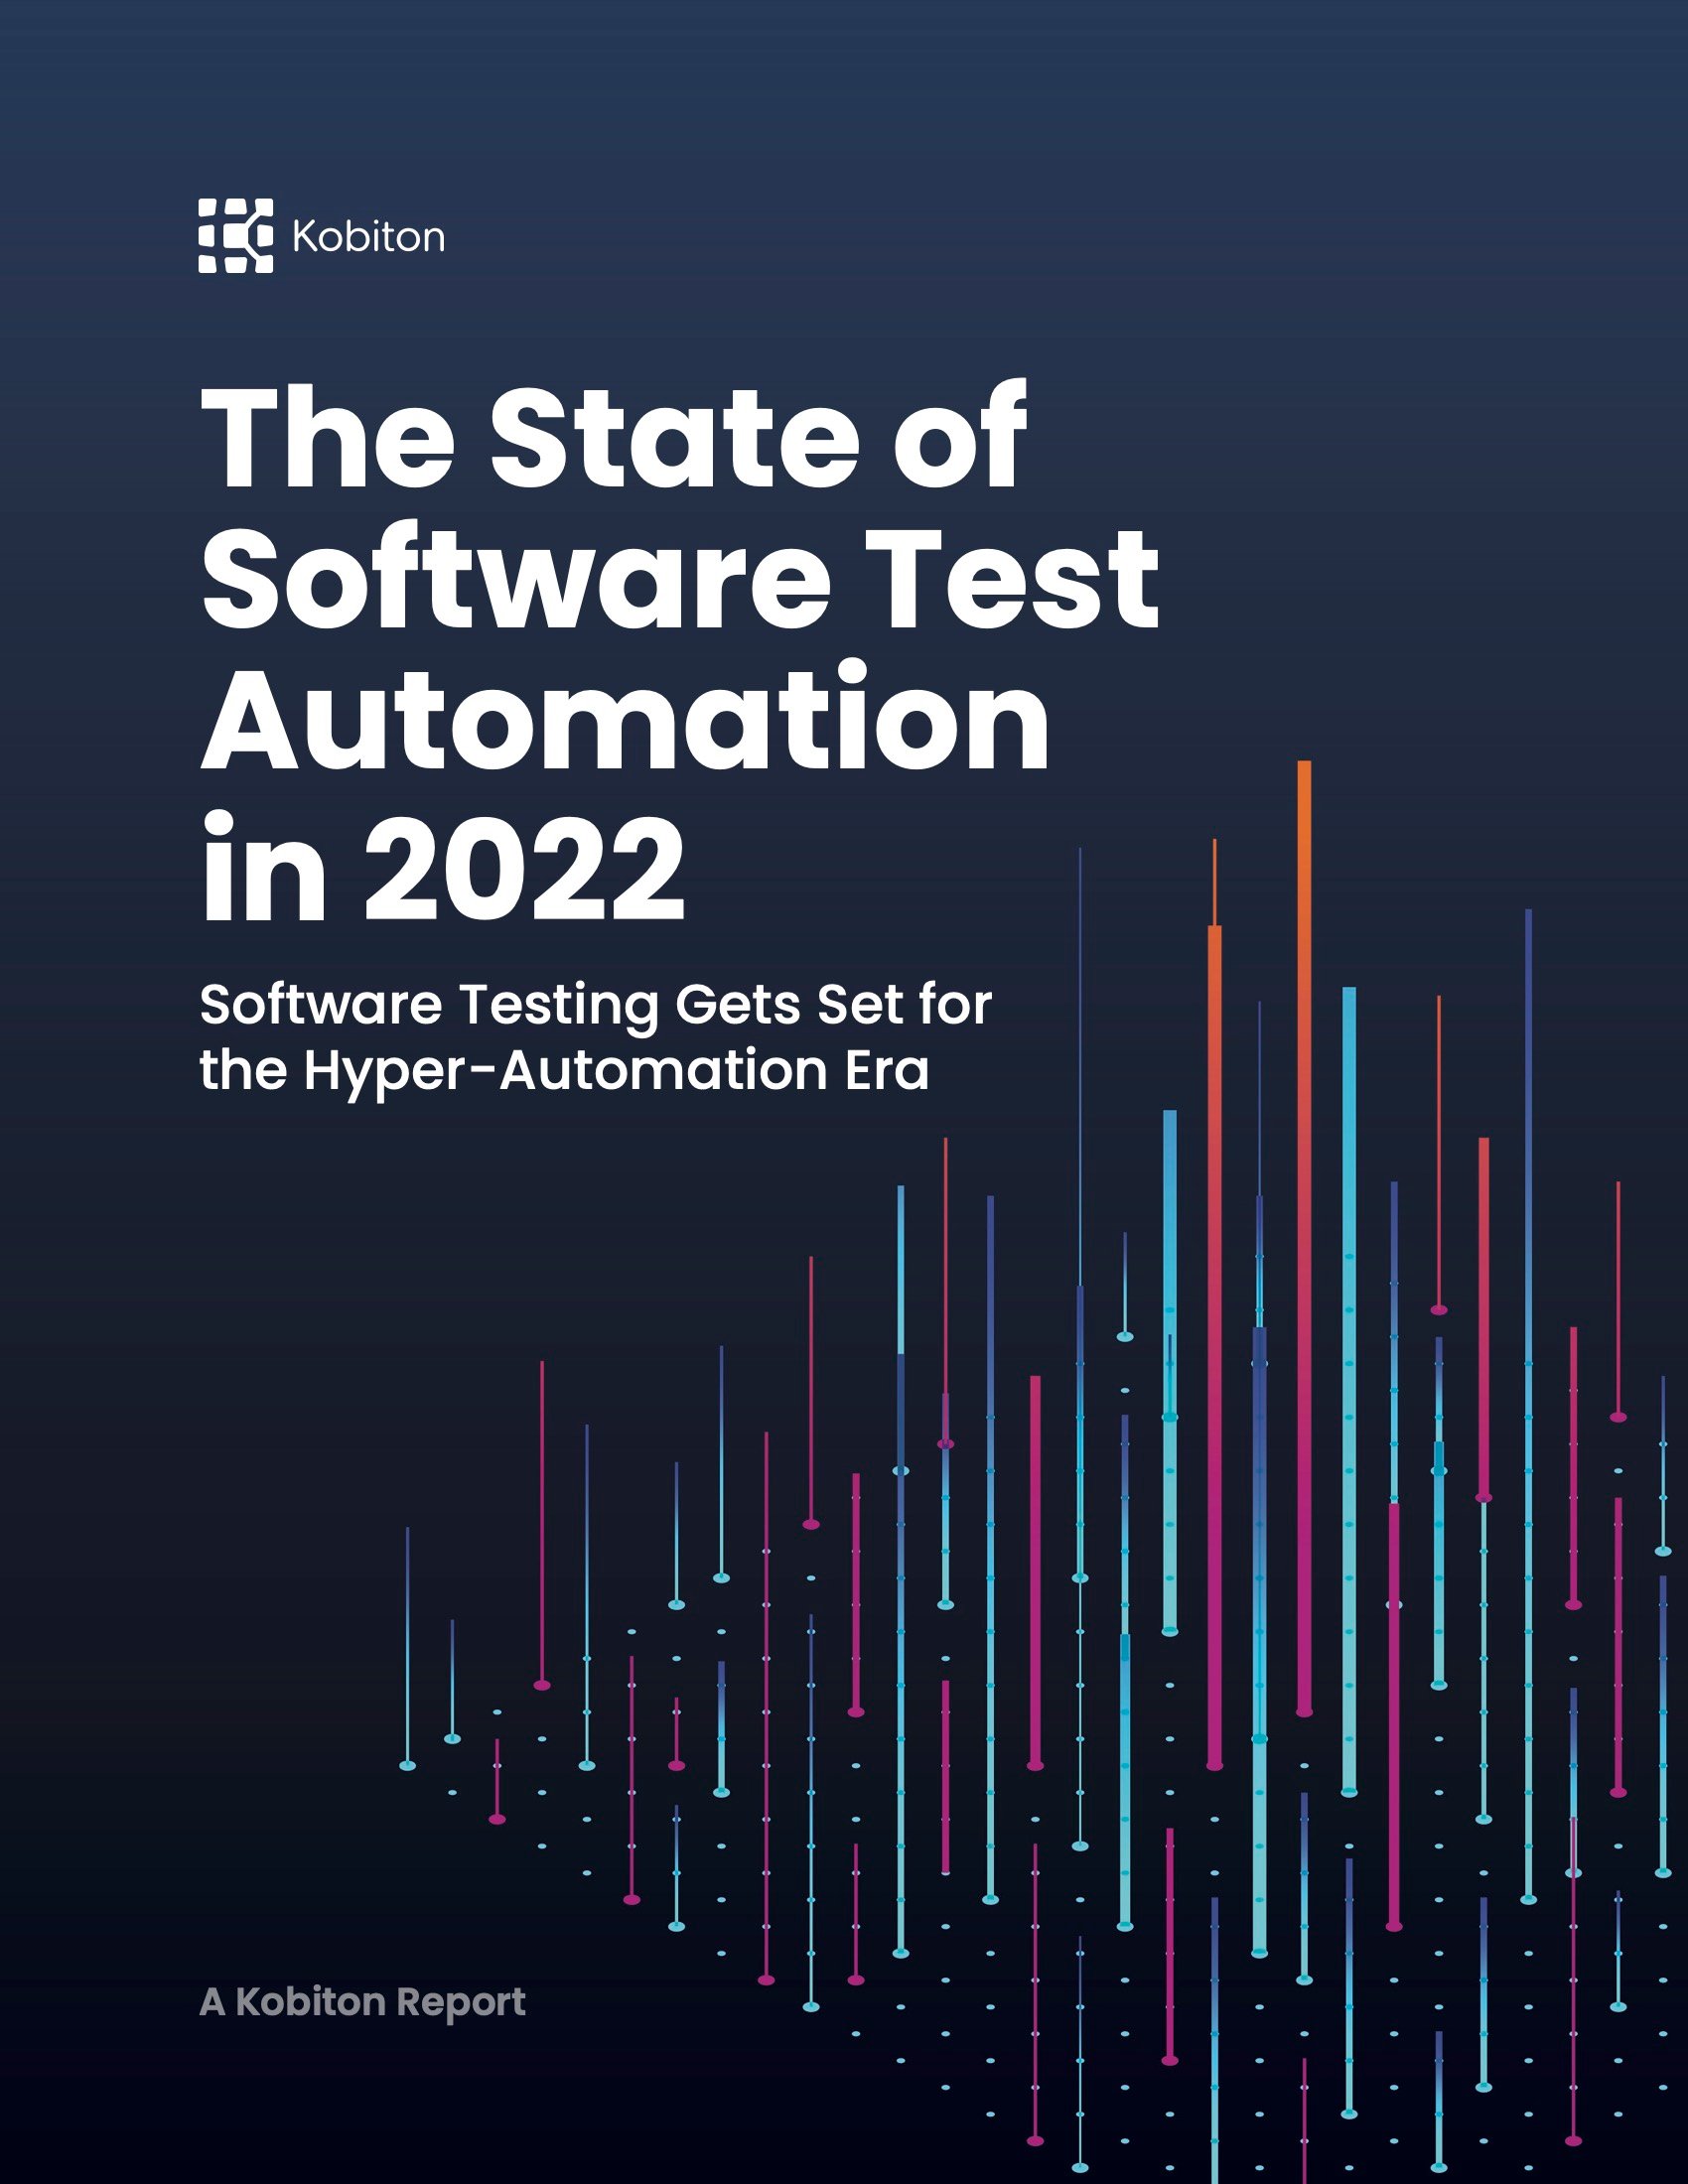 The State of Software Test Automation in 2022 - Kobiton